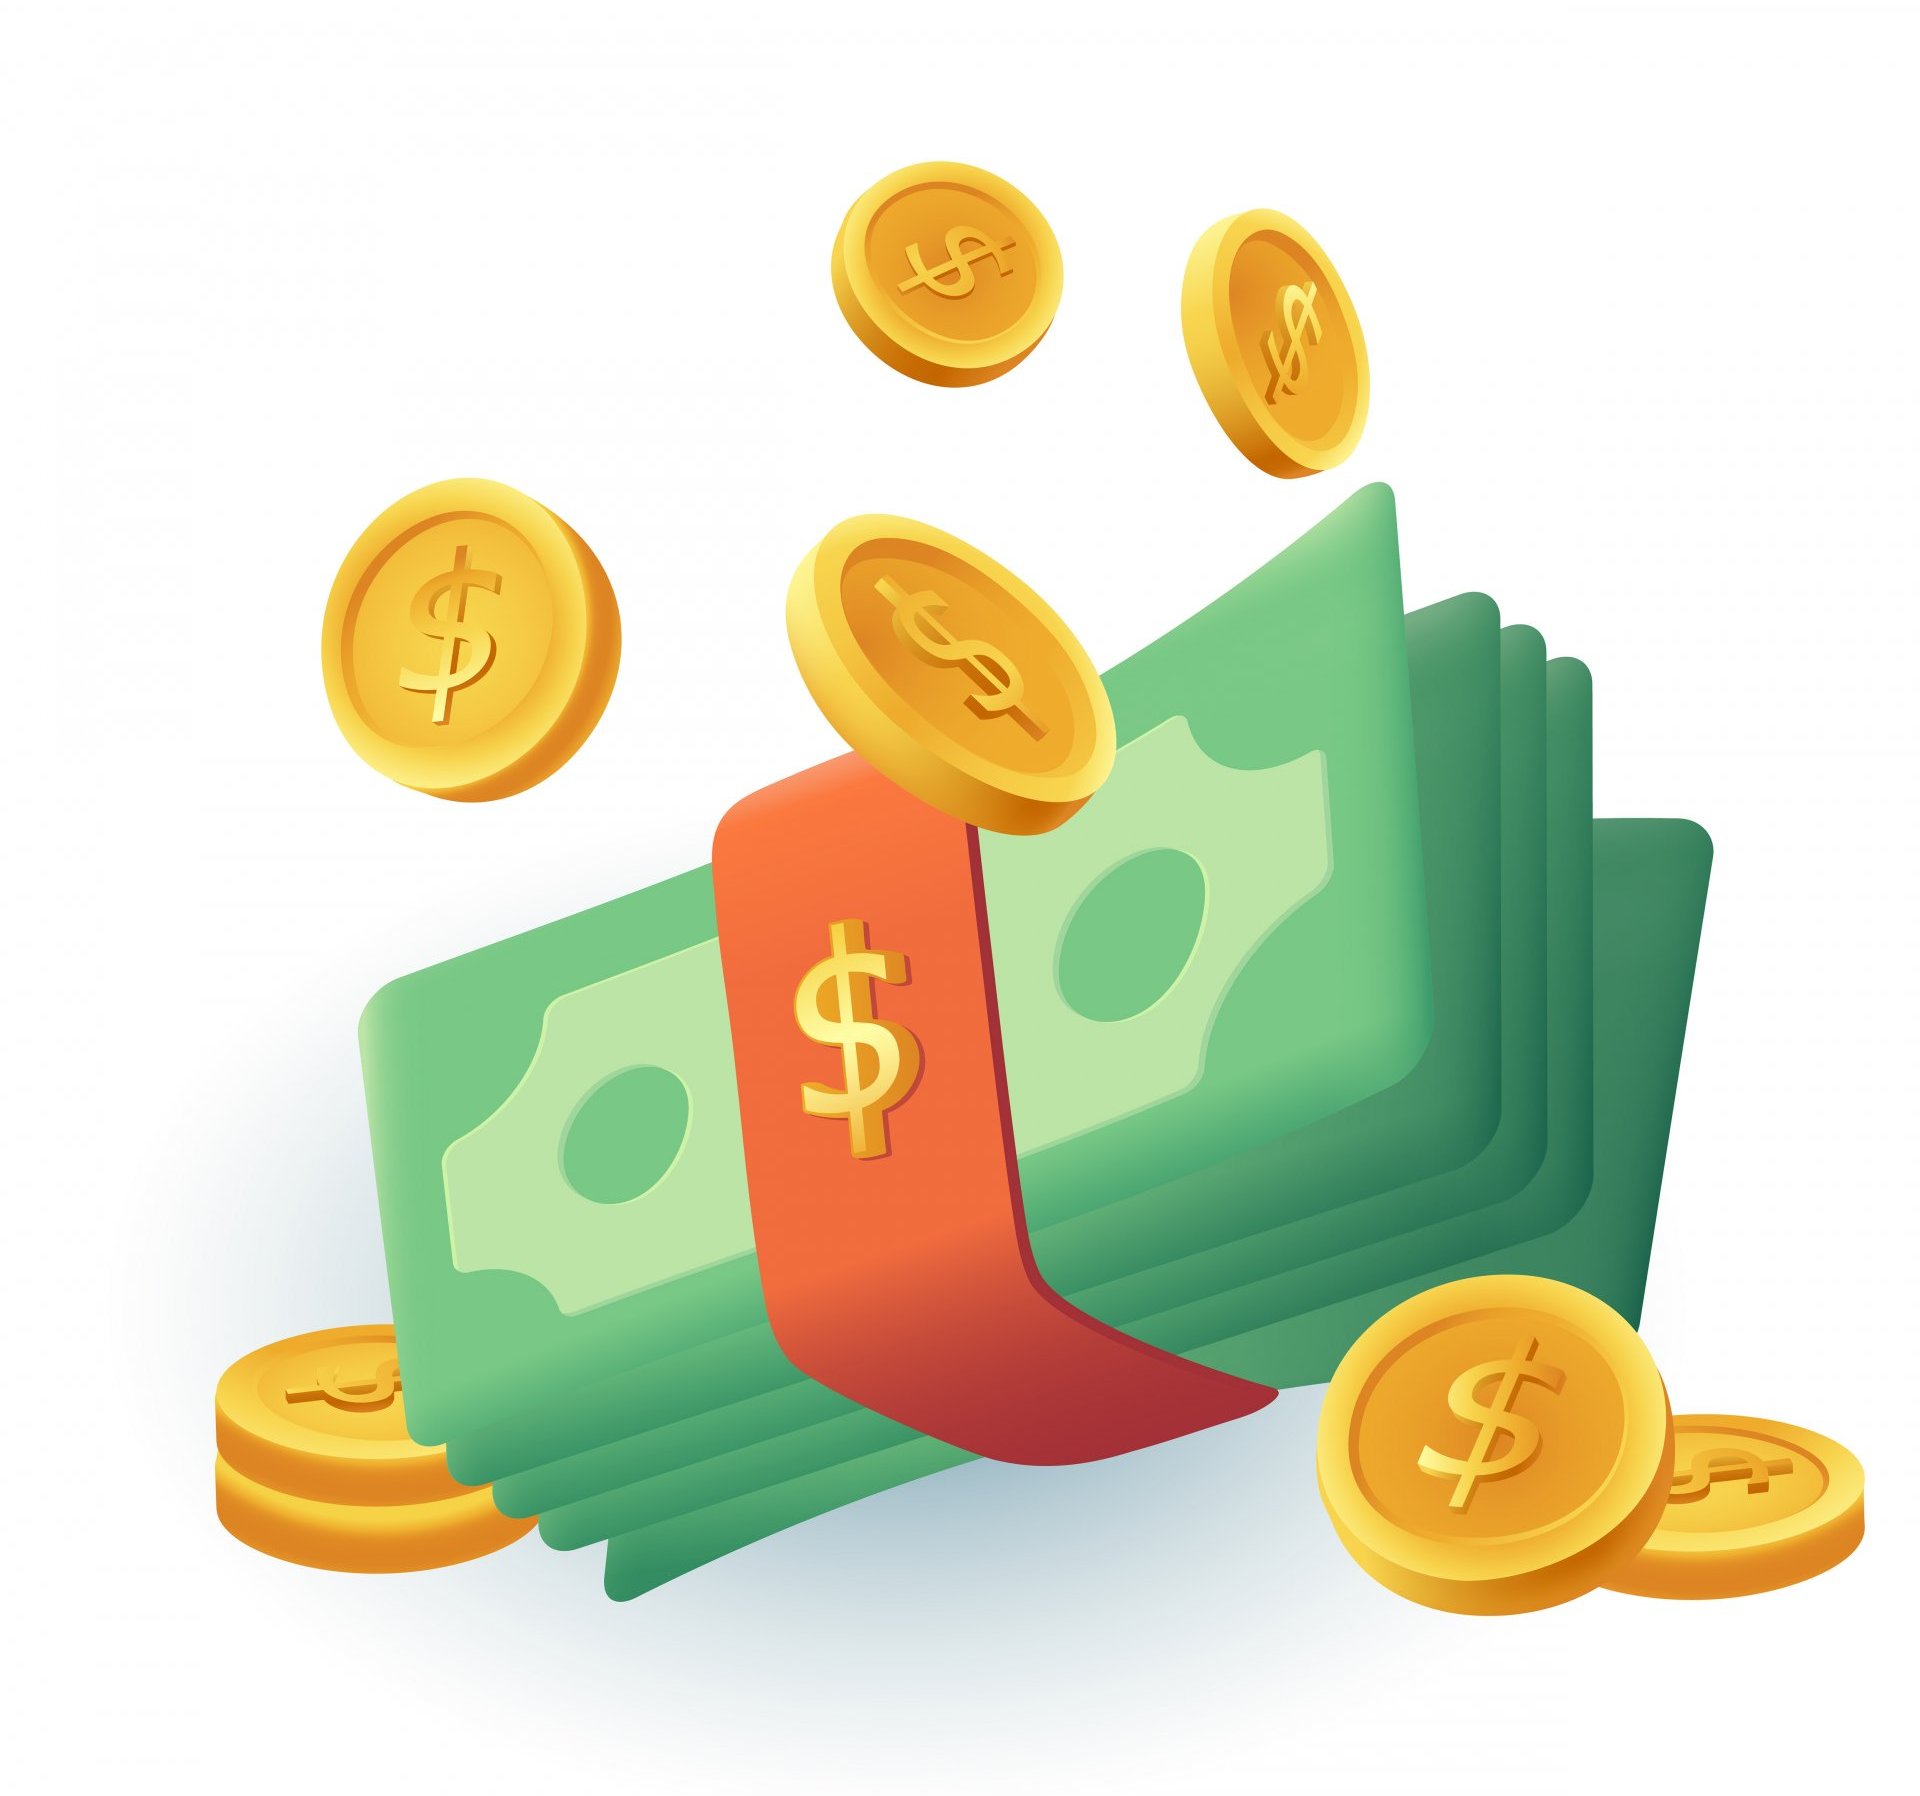 Stack_of_money_and_gold_coins_3d_cartoon_style_icon.jpg